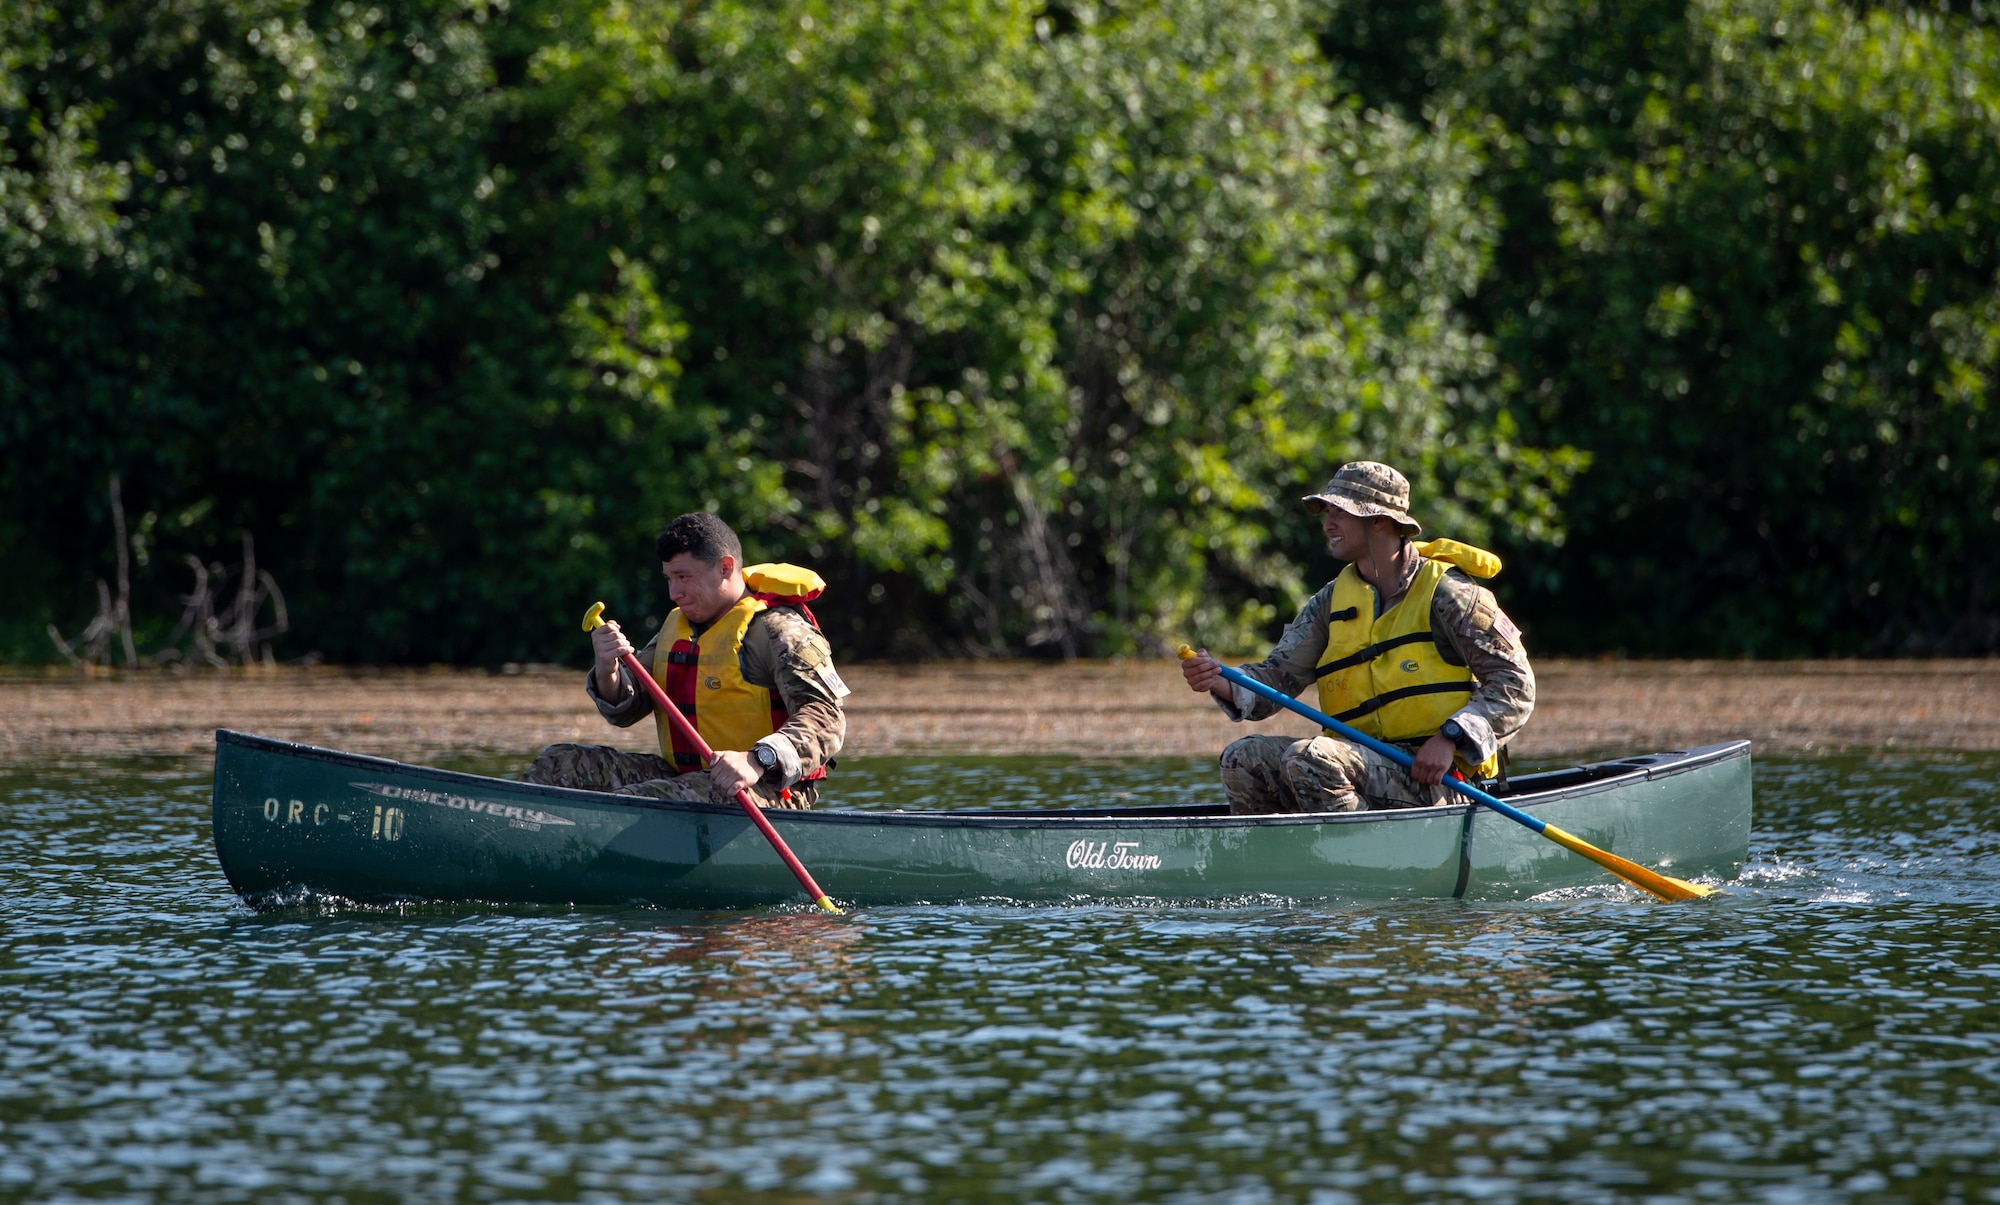 U.S. Air Force Senior Airman Matthew Arellano, left, and Staff Sgt. Jacob Lara, tactical air control party (TACP) specialists, 25th Air Support Operations Squadron, canoe across 6-mile Lake while competing in the Chaos Challenge 2021 at Joint Base Elmendorf-Richardson, Alaska, July 15, 2021. The Chaos Challenge 2021 was a multi-day series of mental and physical contests sponsored by the 1st Air Support Operations Group with participants from the 3rd, 5th, 25th, and 604th Air Support Operations Squadrons and a guest team from the 673d Security Forces Squadron. The winner of the competition will go on to compete in Lightning Challenge 2021 to determine the best two-man TACP team in the Air Force.